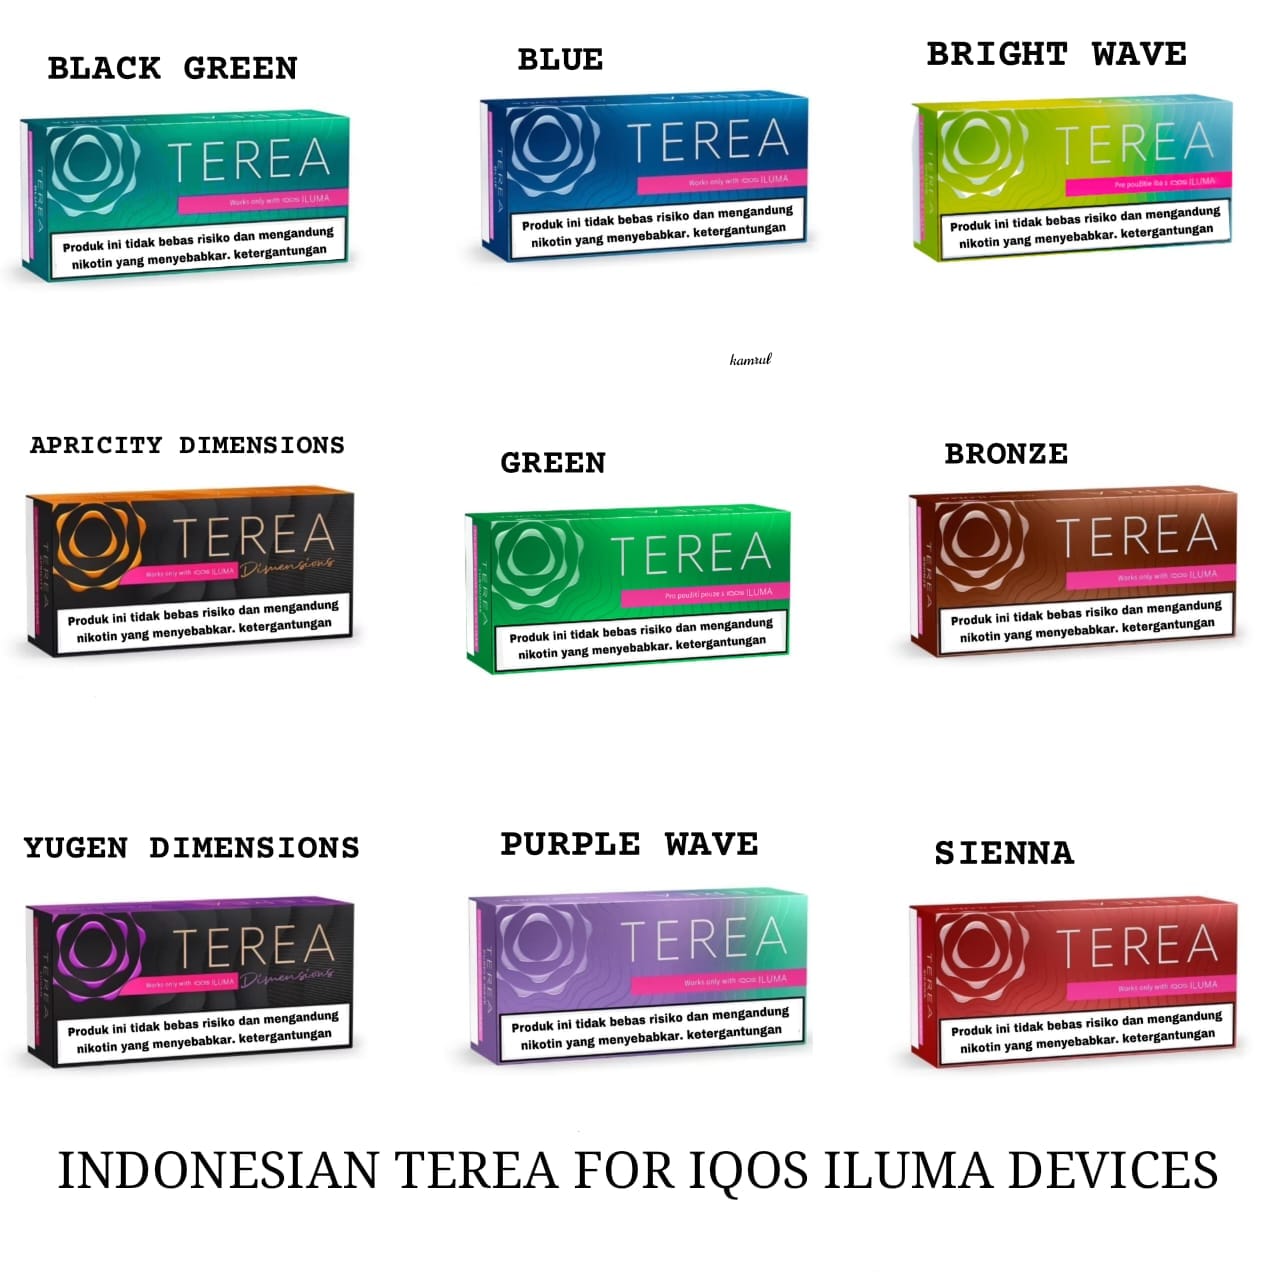 Terea Indonesian Bright Wave